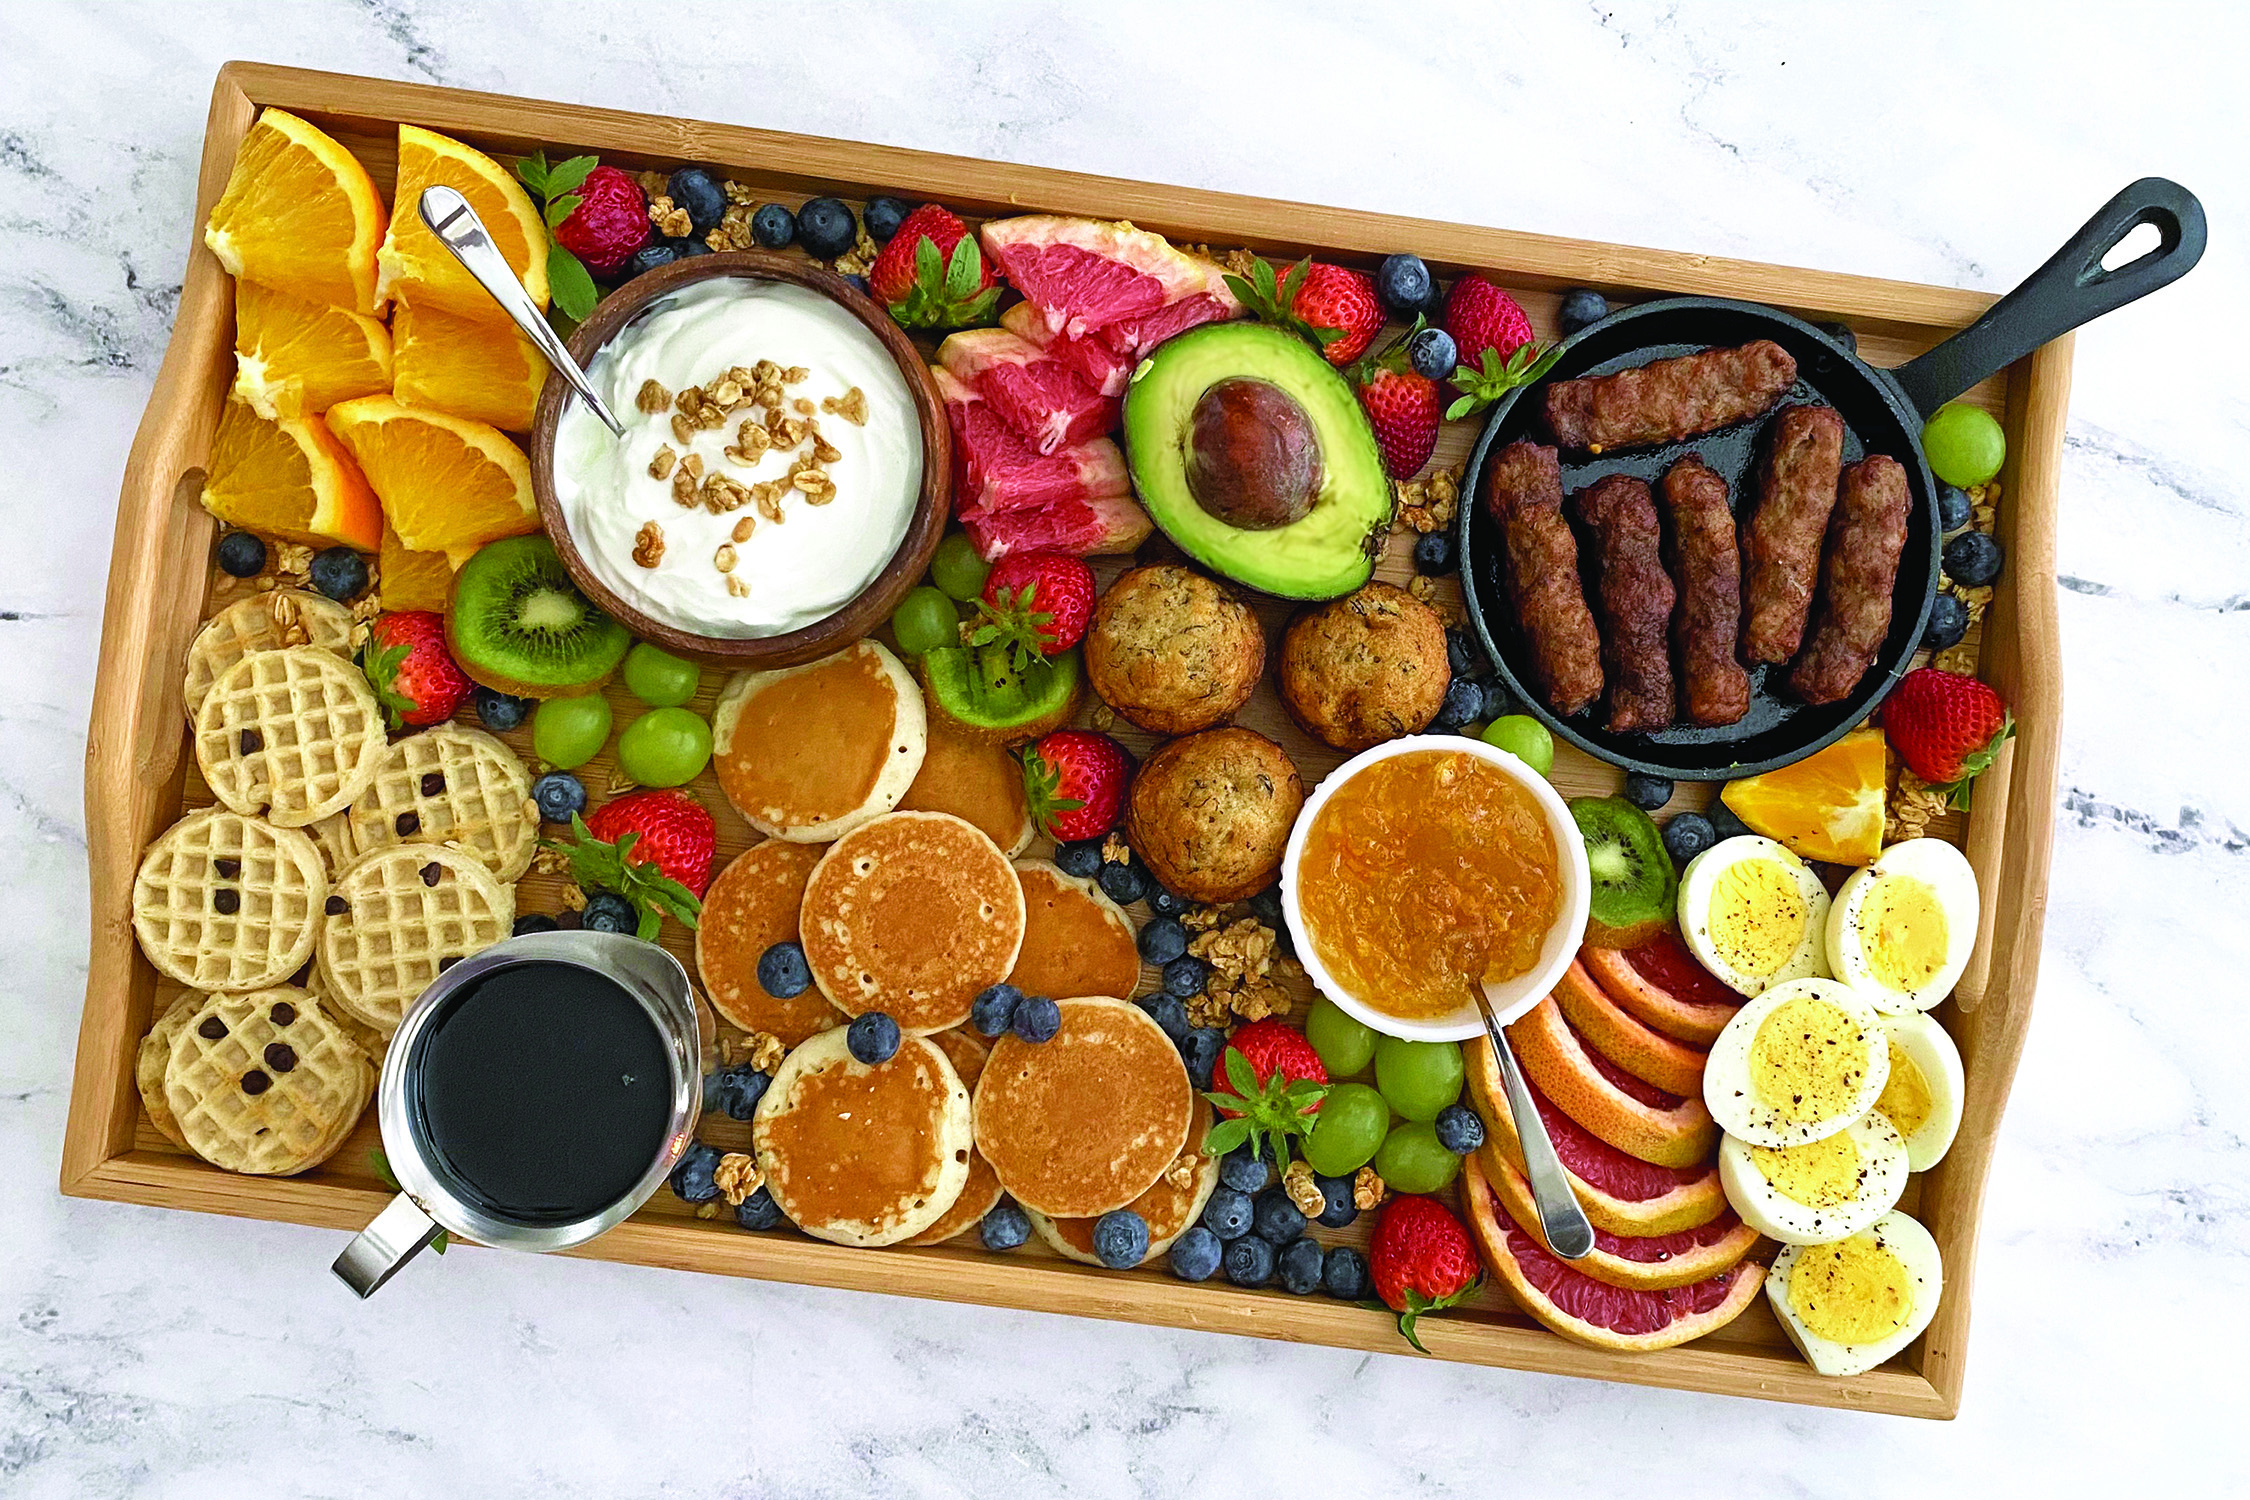 Breakfast charcuterie board. (Photo courtesy of Family Features.)